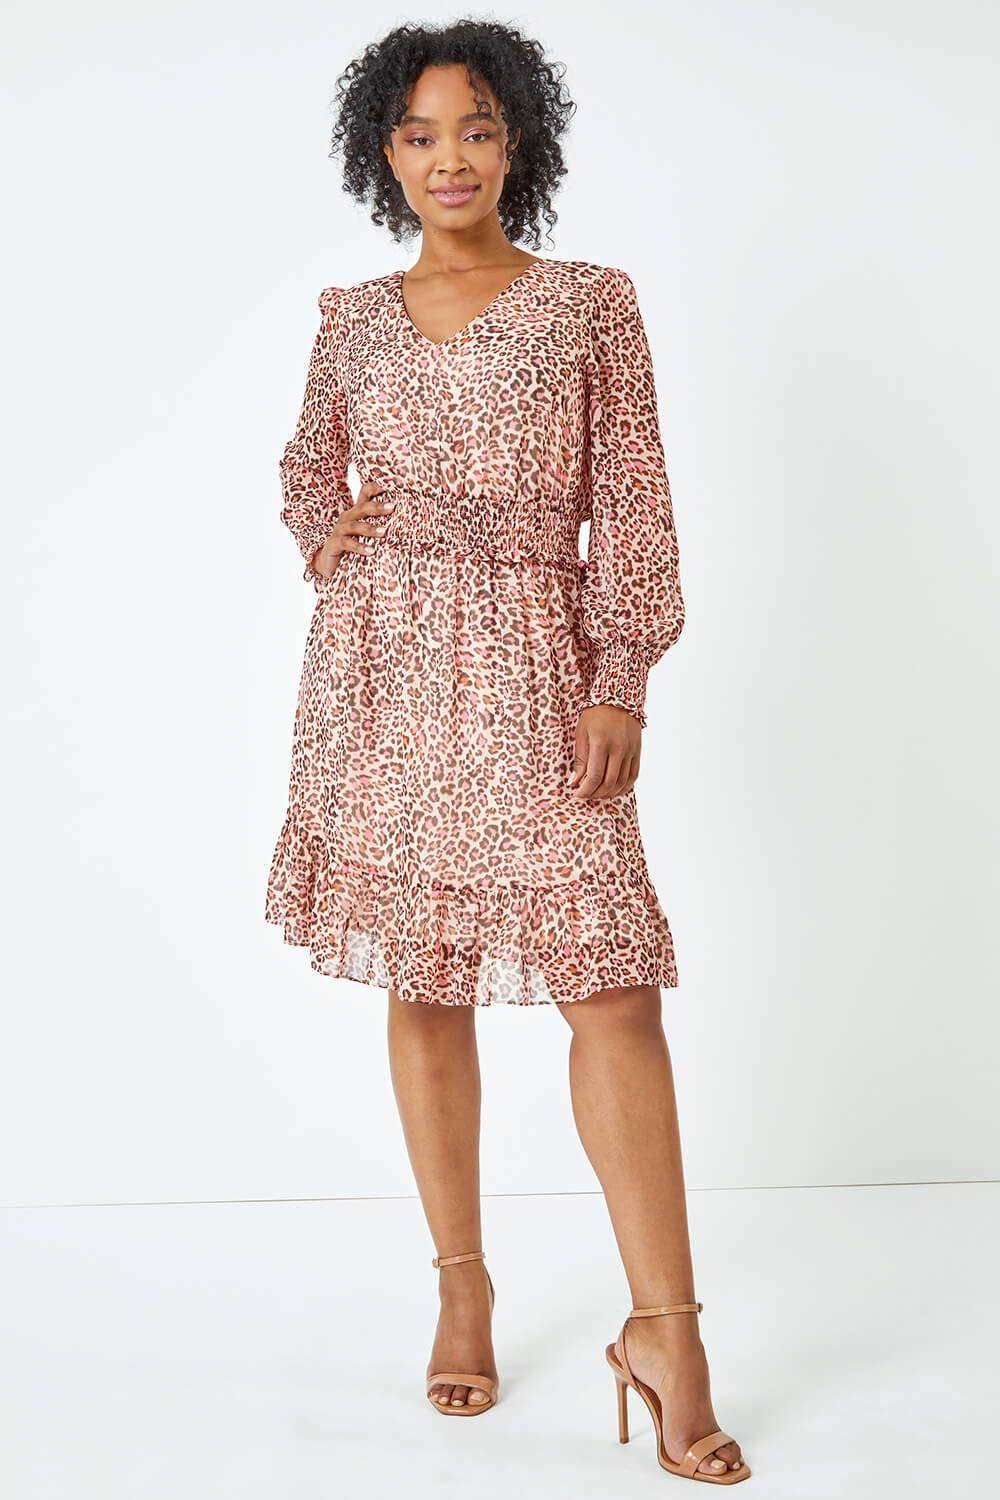 Stone Petite Tiered Leopard Print Frill Dress, Image 2 of 5